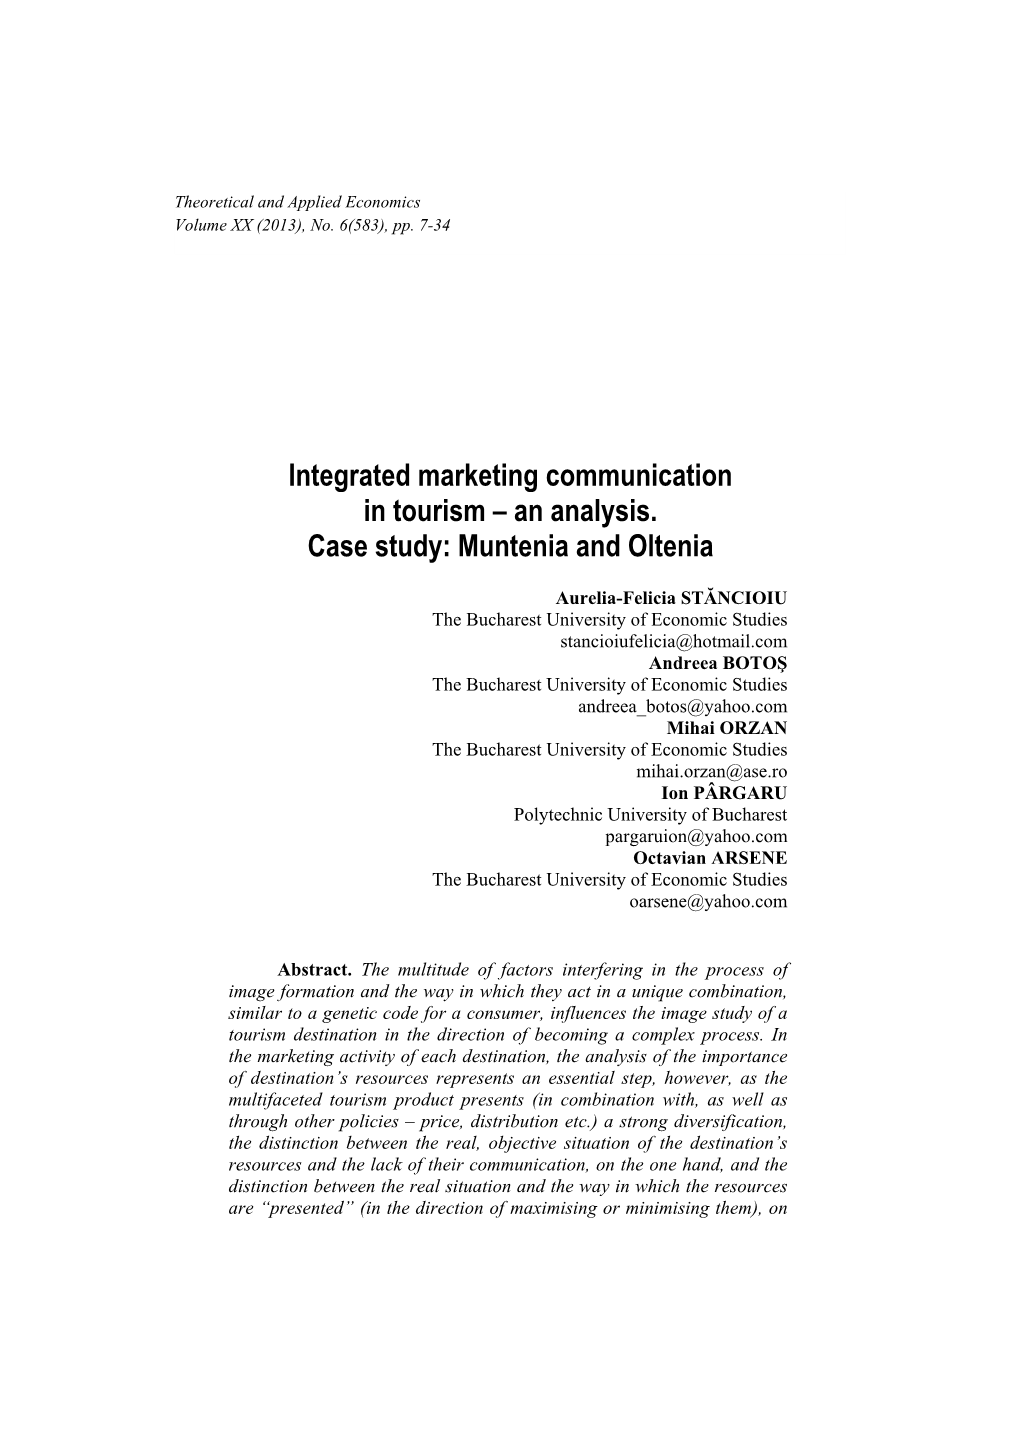 Integrated Marketing Communication in Tourism – an Analysis